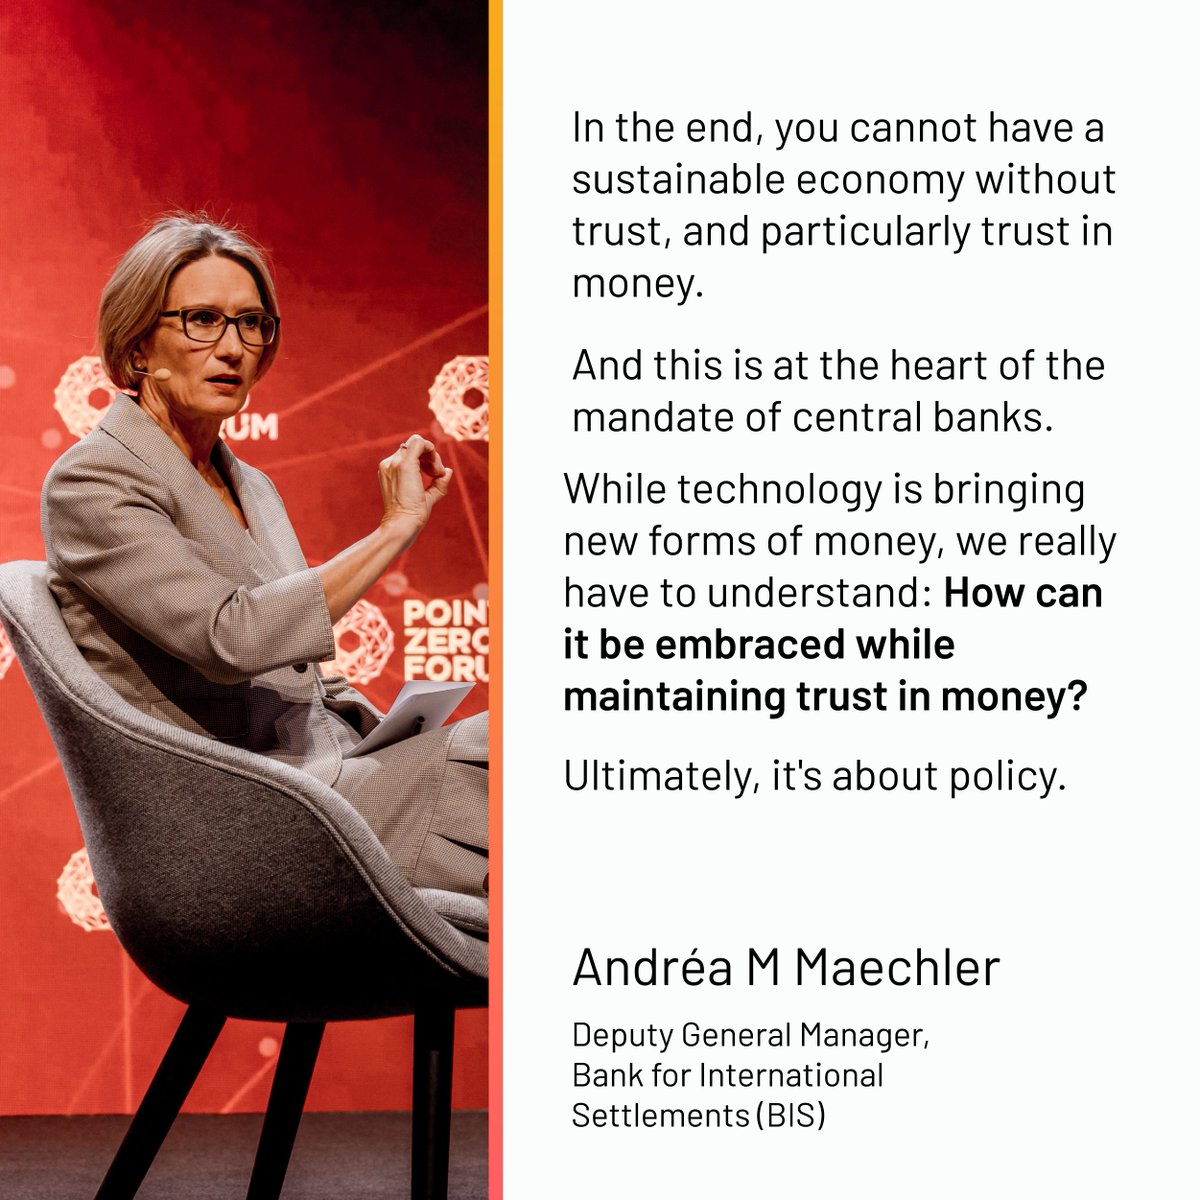 Andrea M Maechler, Deputy General Manager at @BIS_org , emphasised the role of trust in fostering a robust economy during #PZF2023. But how do we uphold this in the digital age? These conversations on digital money continue at #PZF2024: pointzeroforum.com/registration?&…